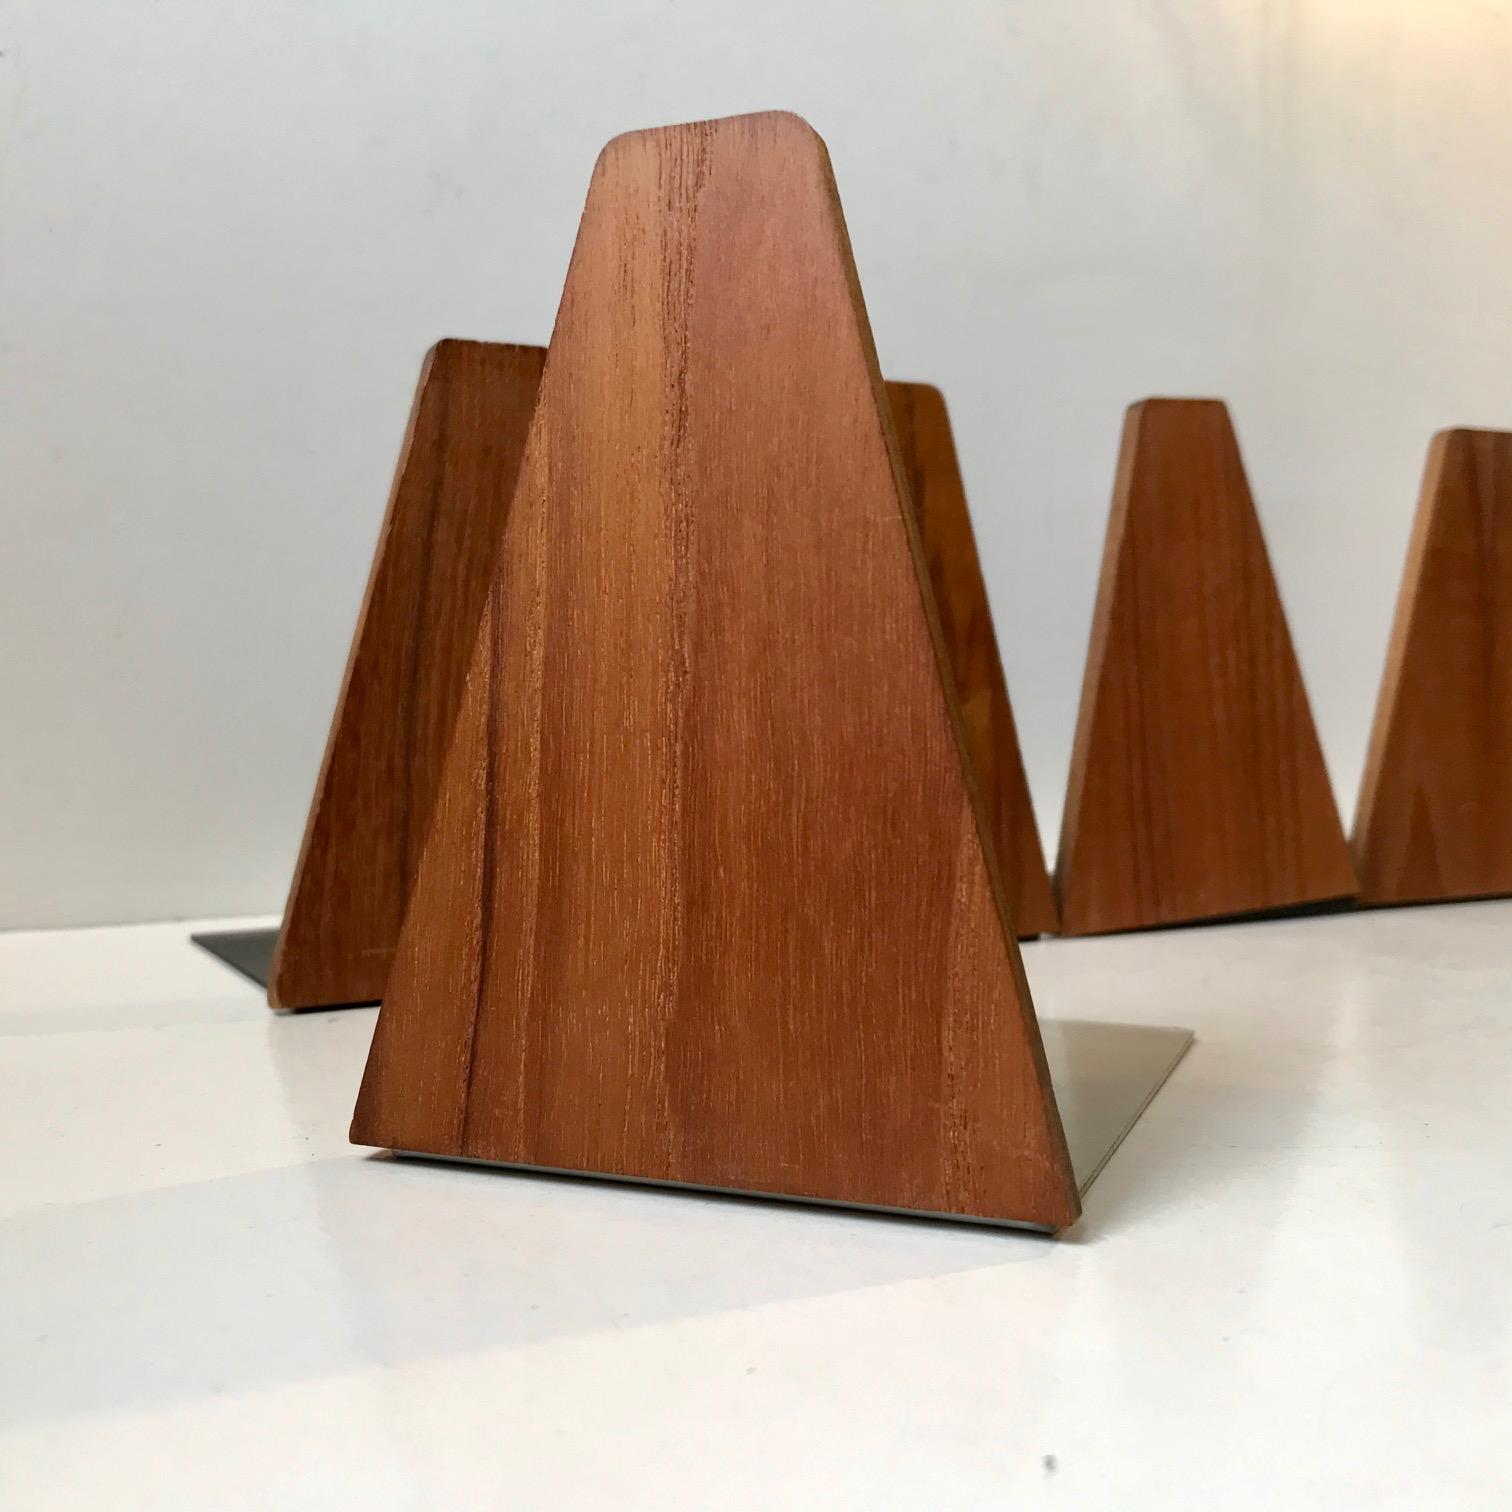 A set of 9 bookends in untreated teak with steel rest's manufactured by ESA in Denmark during the 1960s or 70s. The design is similar to bookends attributed to Kai Kristiansen. Measurements: Height: 12 cm, depth: 11 cm.